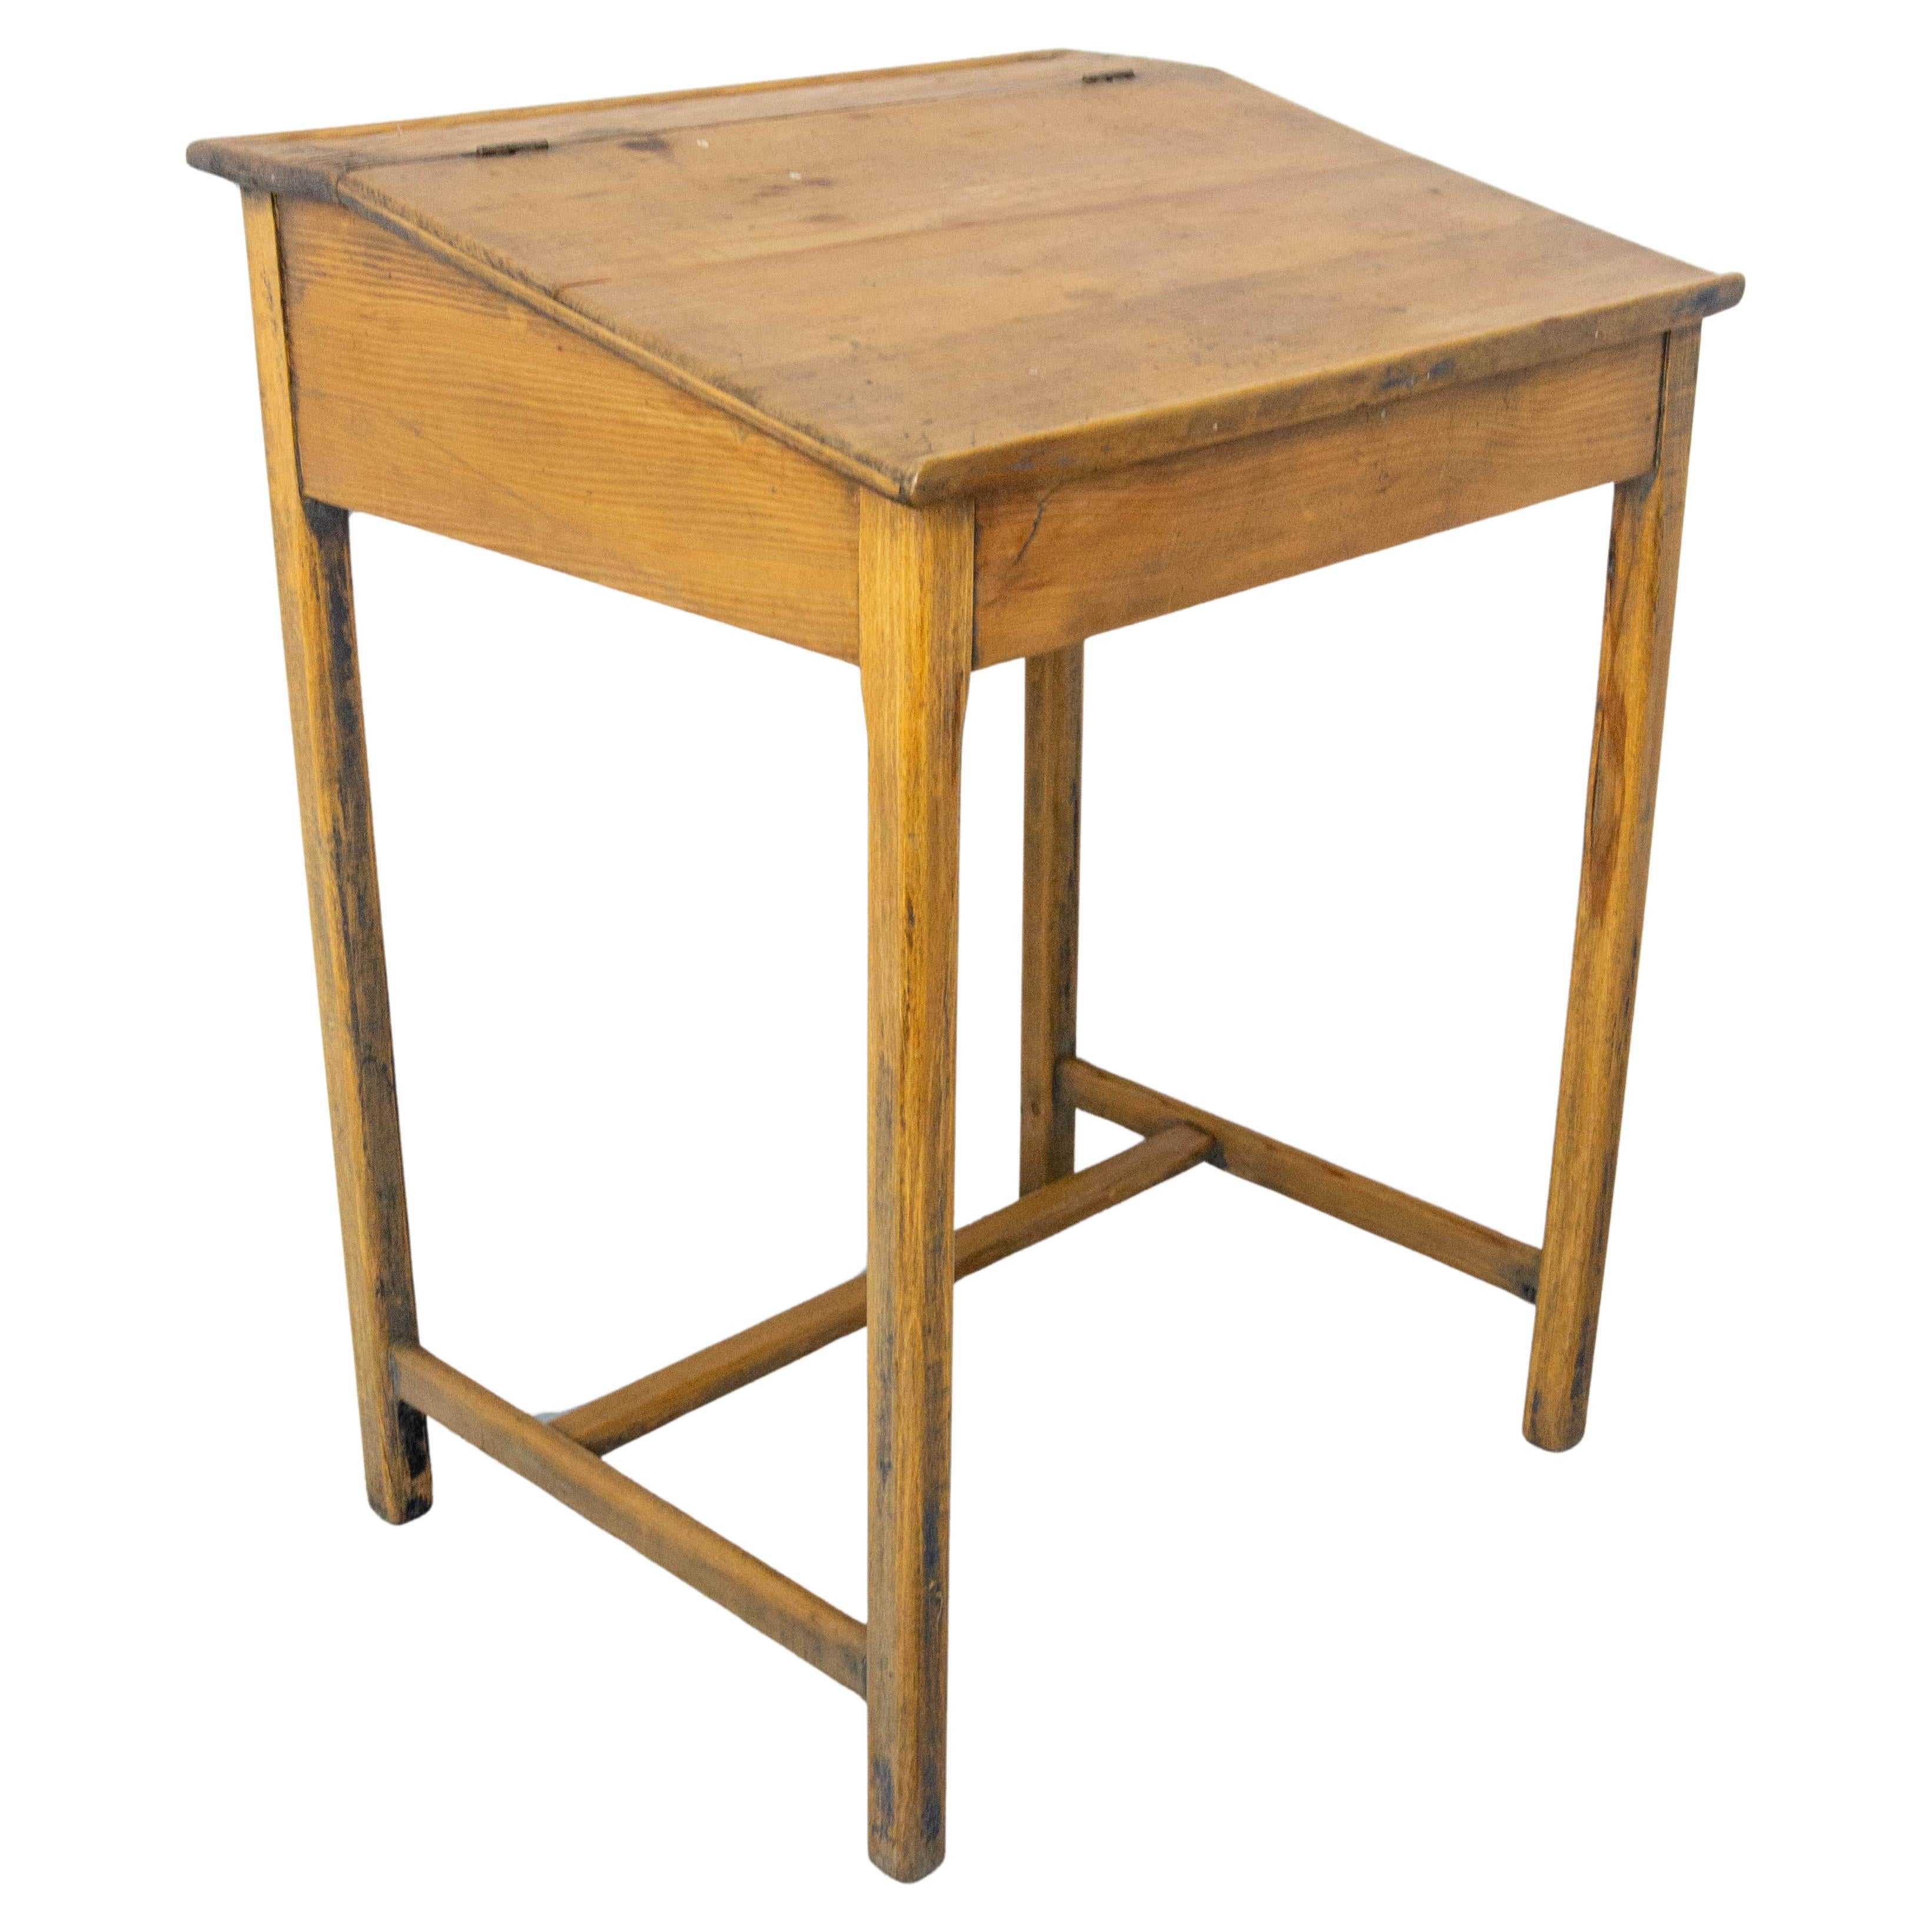 Student Pine Writing Table Slant Top Desk France, Early 20th C